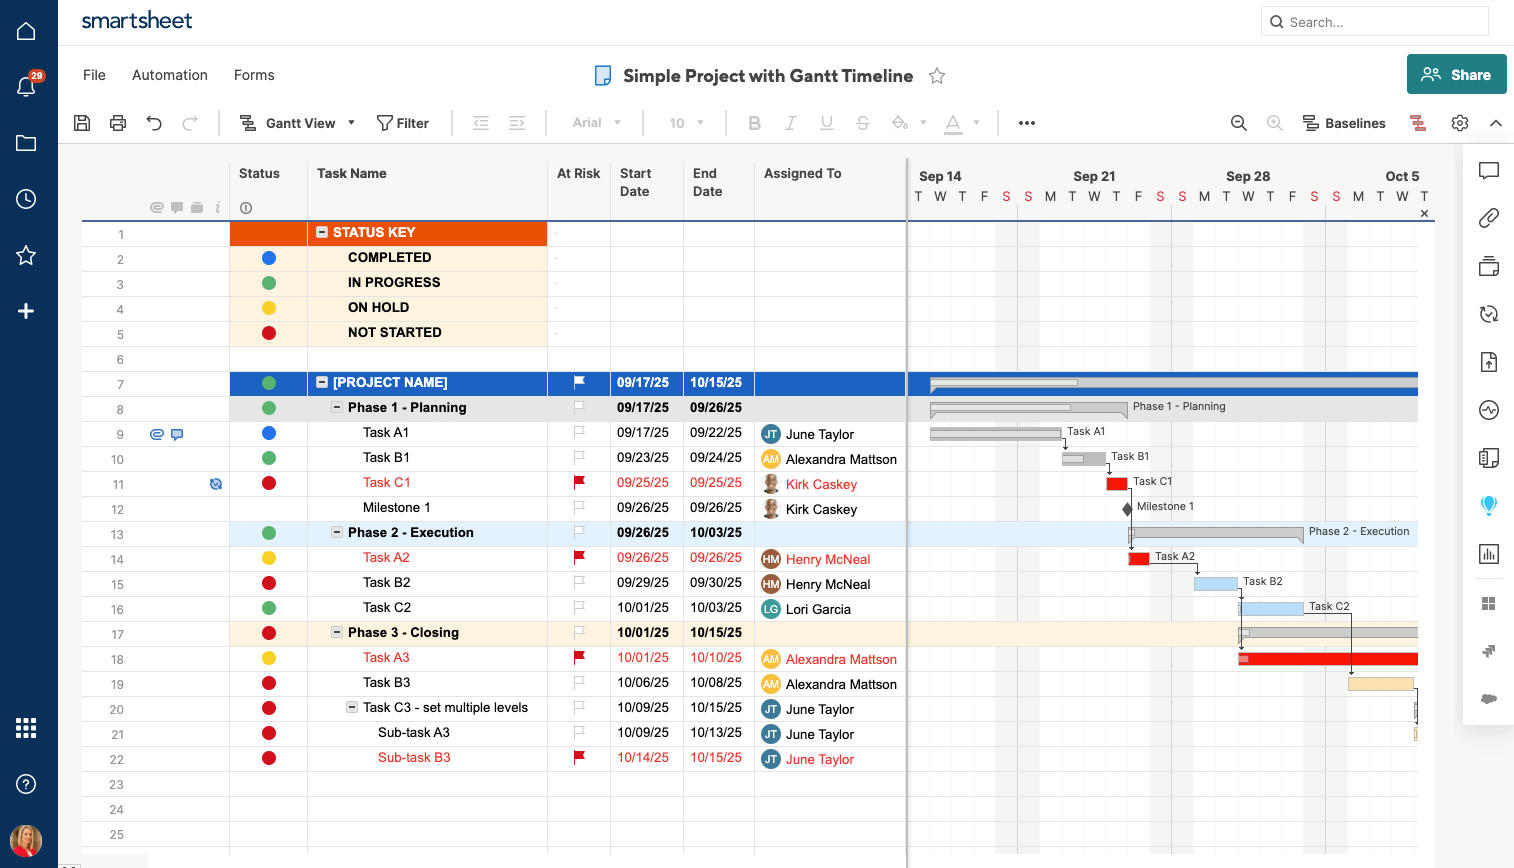 Smartsheet can be used as a construction scheduling software equipped with multiple templates and project management tools